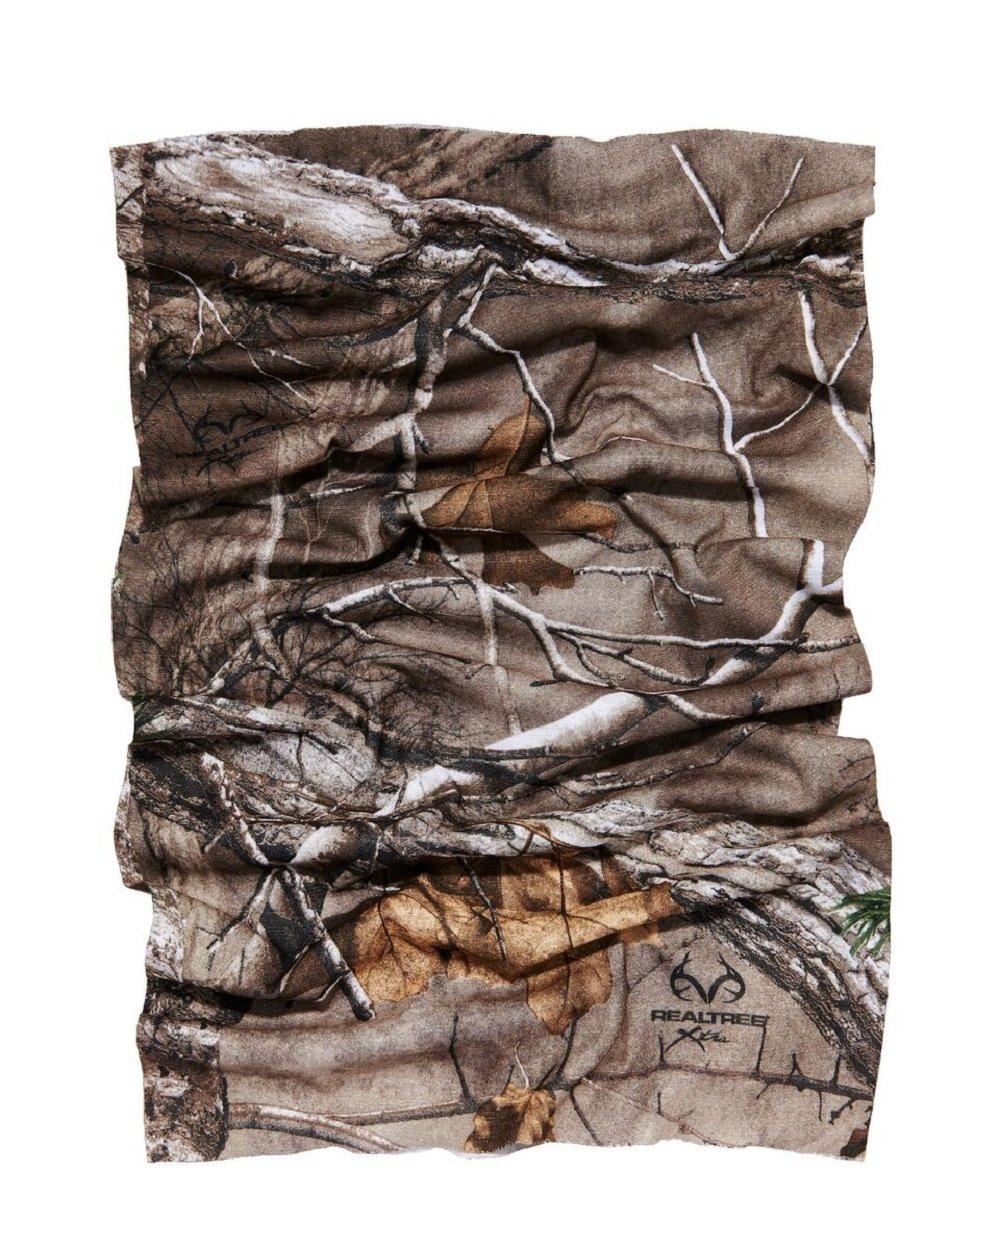 Chill-Its Multi-Band in Realtree Xtra 